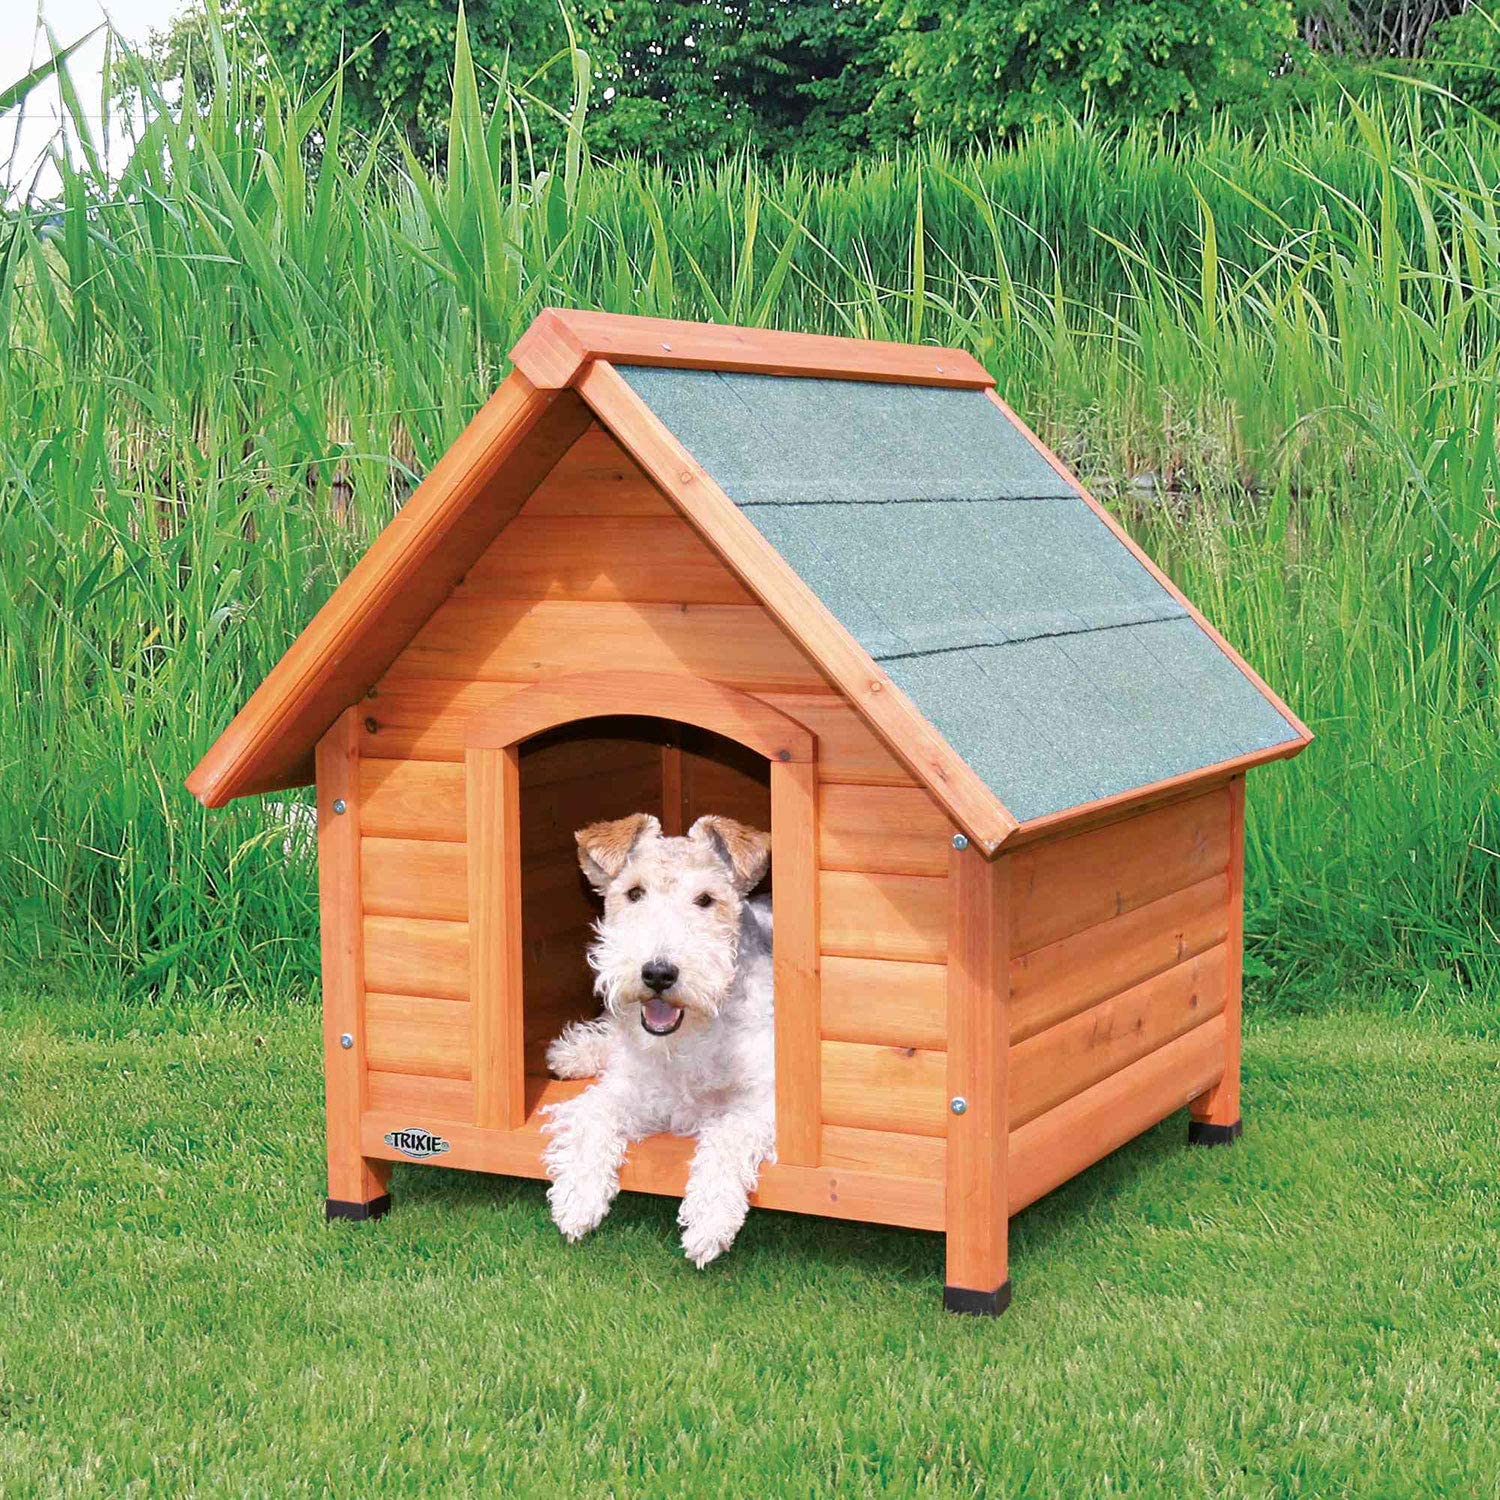 TRIXIE Pet Products Log Cabin Dog House